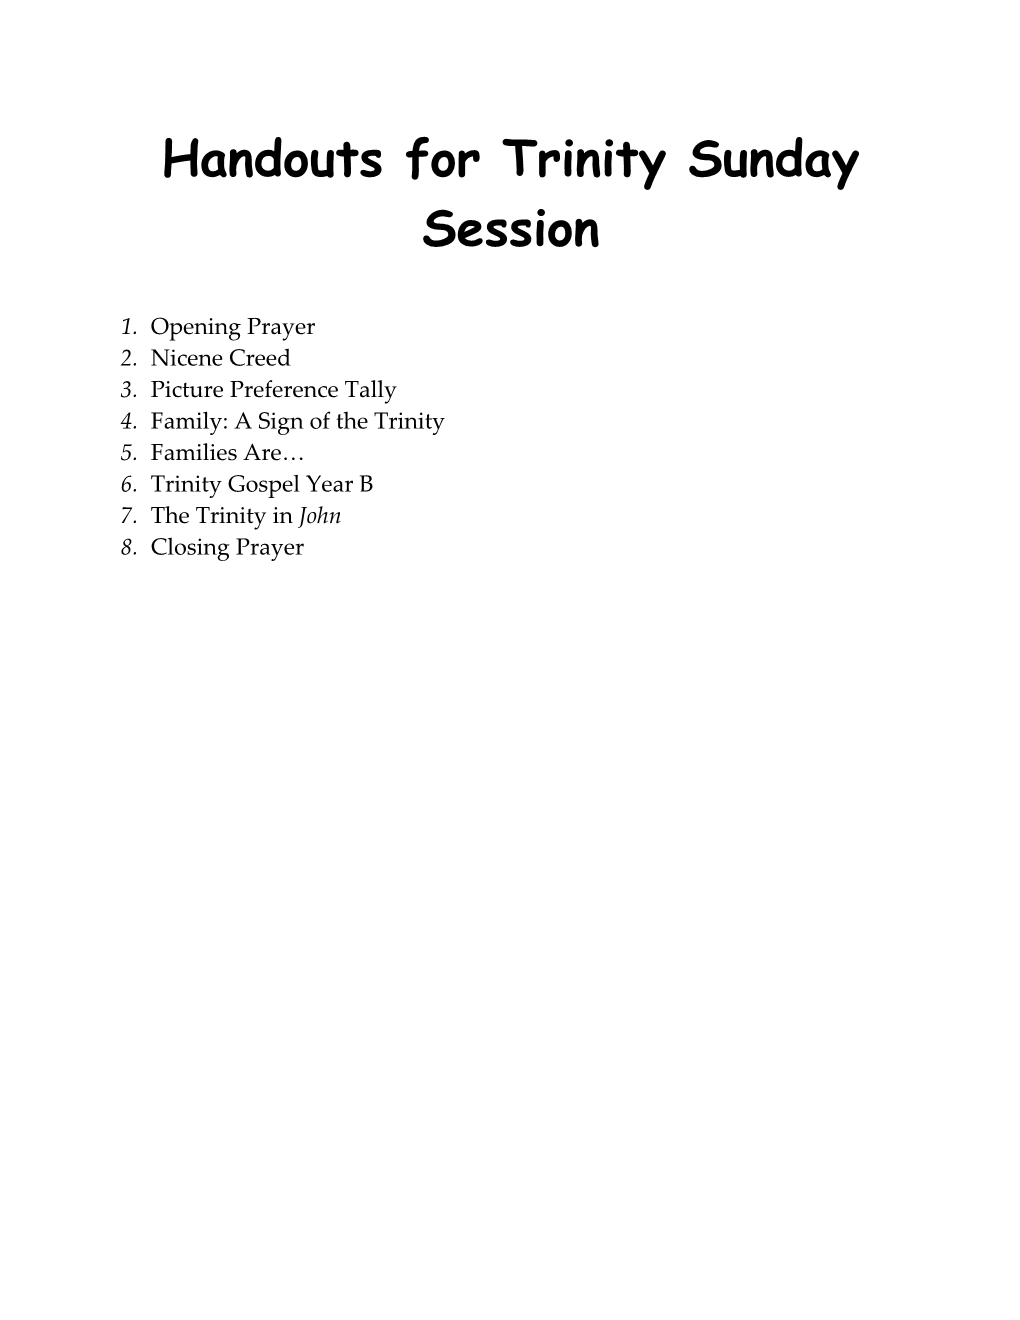 Handouts for Trinity Sunday Session